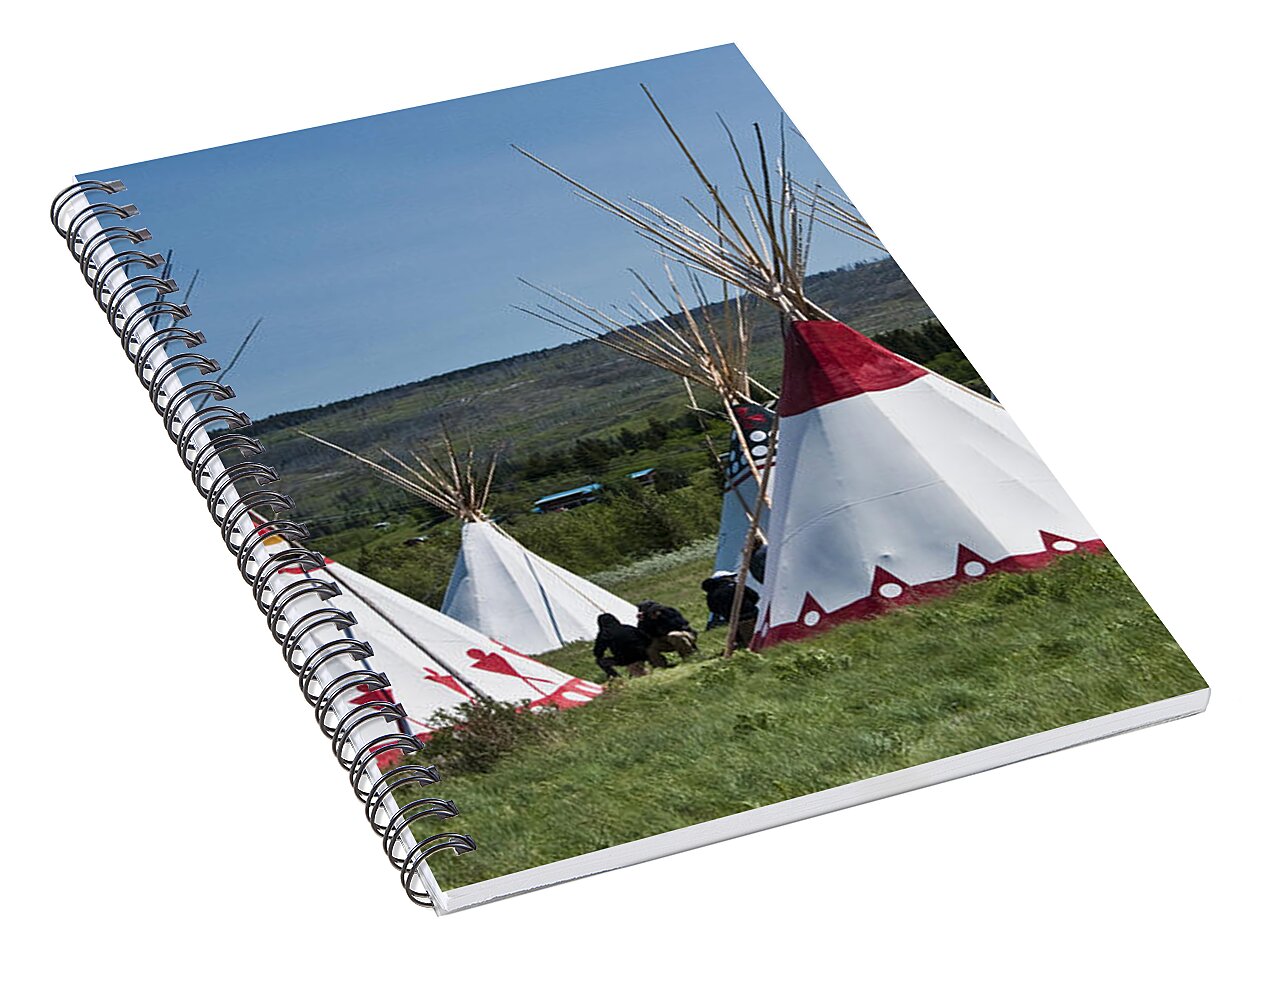 Powwow Teepees Of The Blackfoot Tribe By Glacier National Park No 3100